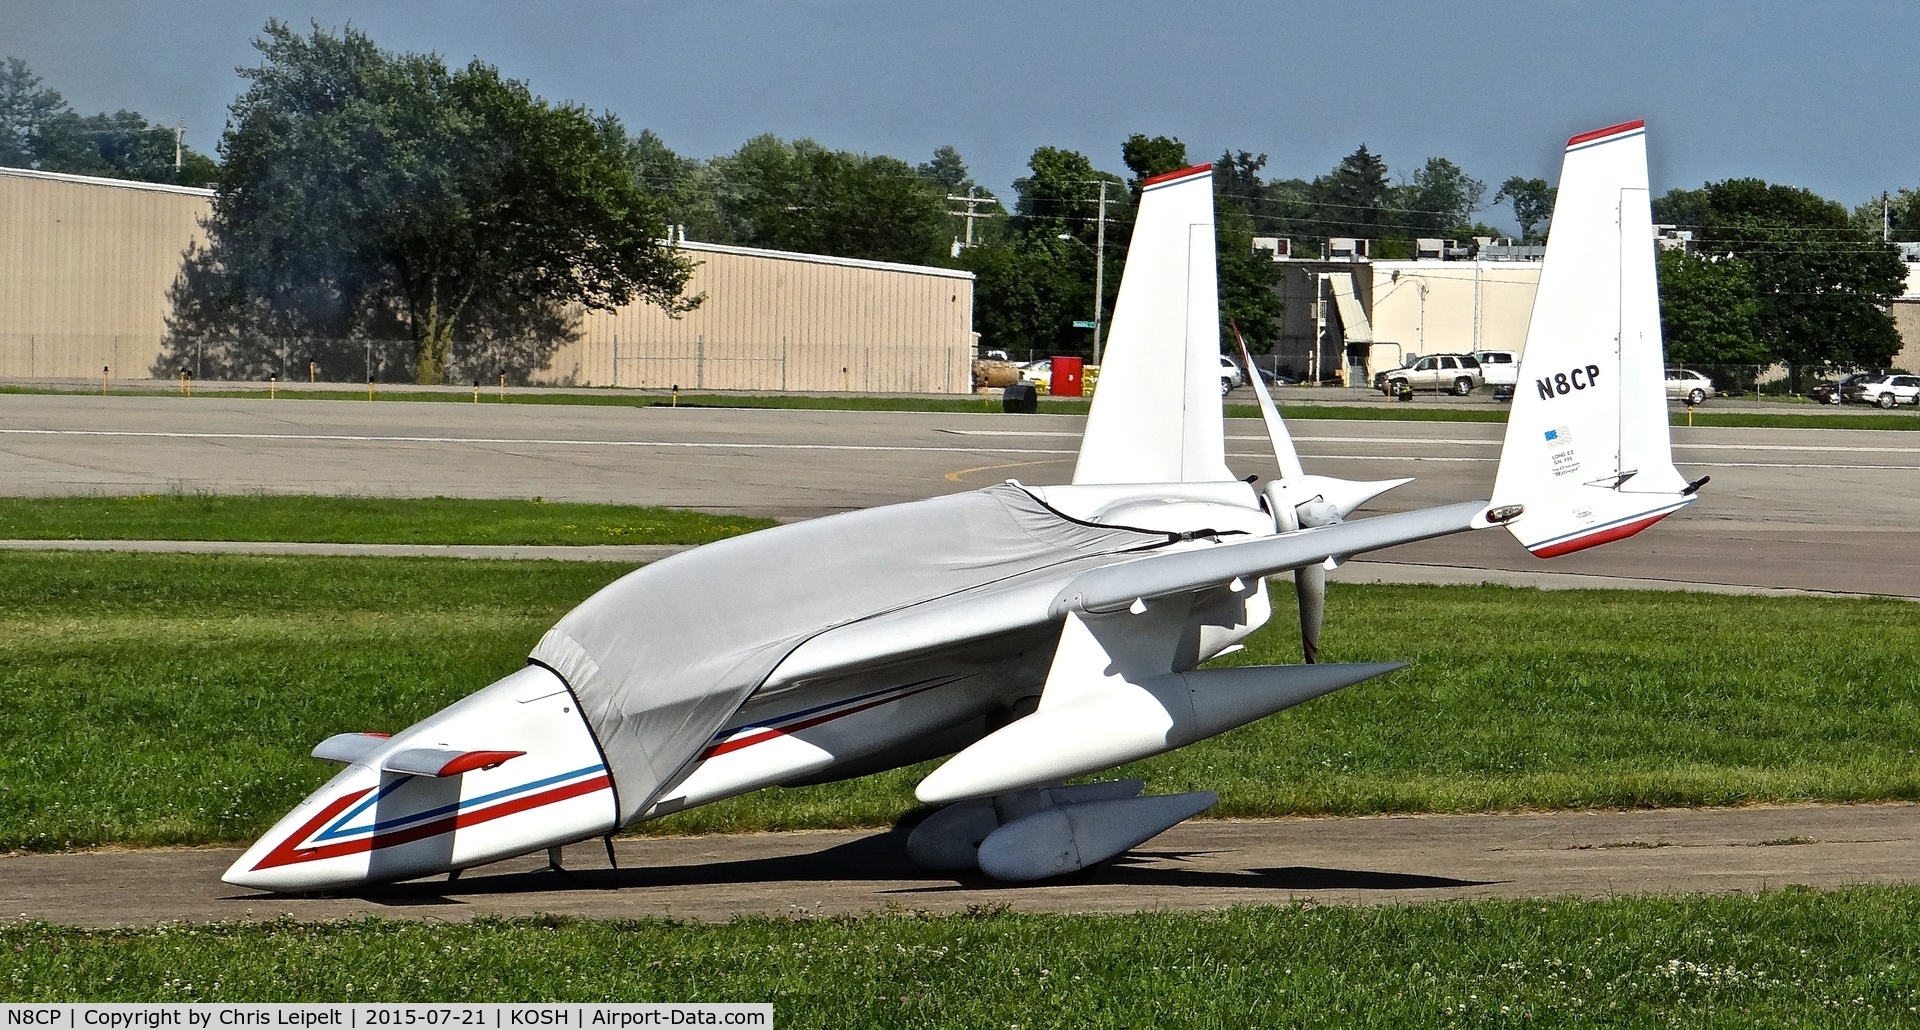 N8CP, Rutan Long-EZ C/N 495, Connecticut-based Long-EZ chilling on the ramp at EAA AirVenture 2015.